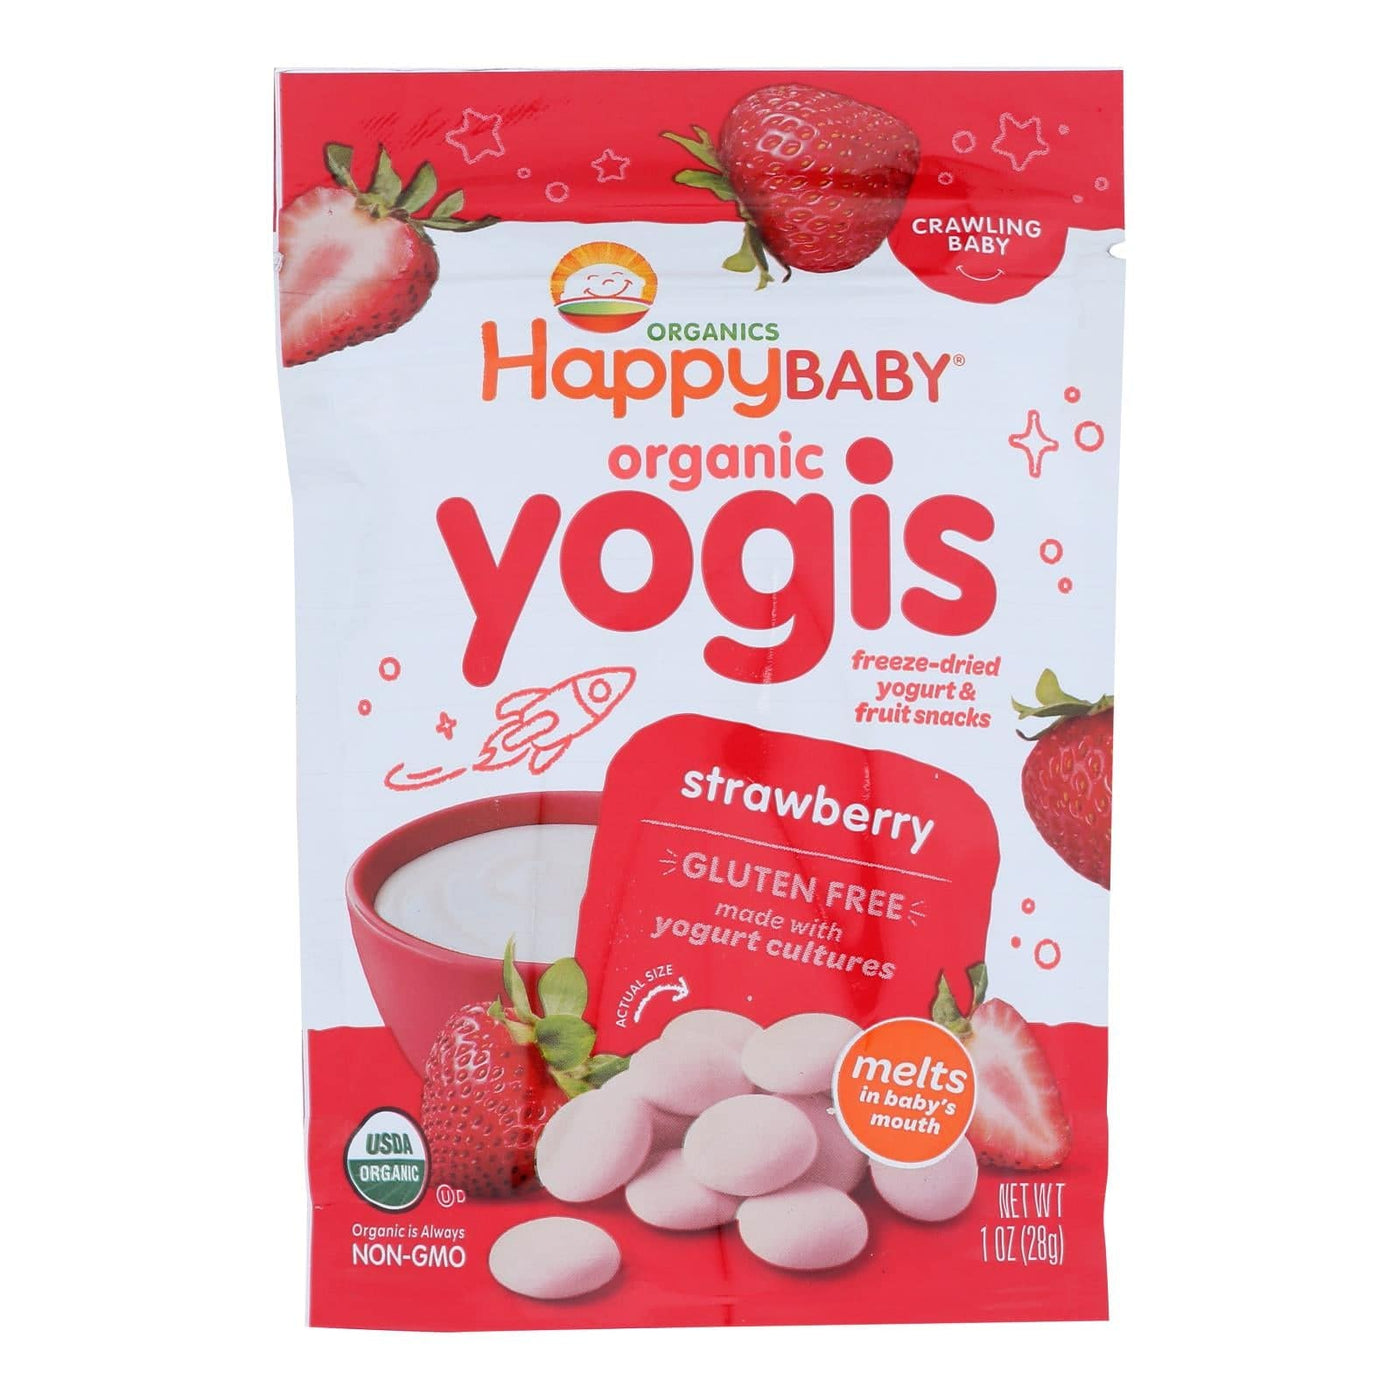 Buy Happy Baby Happy Yogis Organic Superfoods Yogurt And Fruit Snacks Strawberry - 1 Oz - Case Of 8  at OnlyNaturals.us